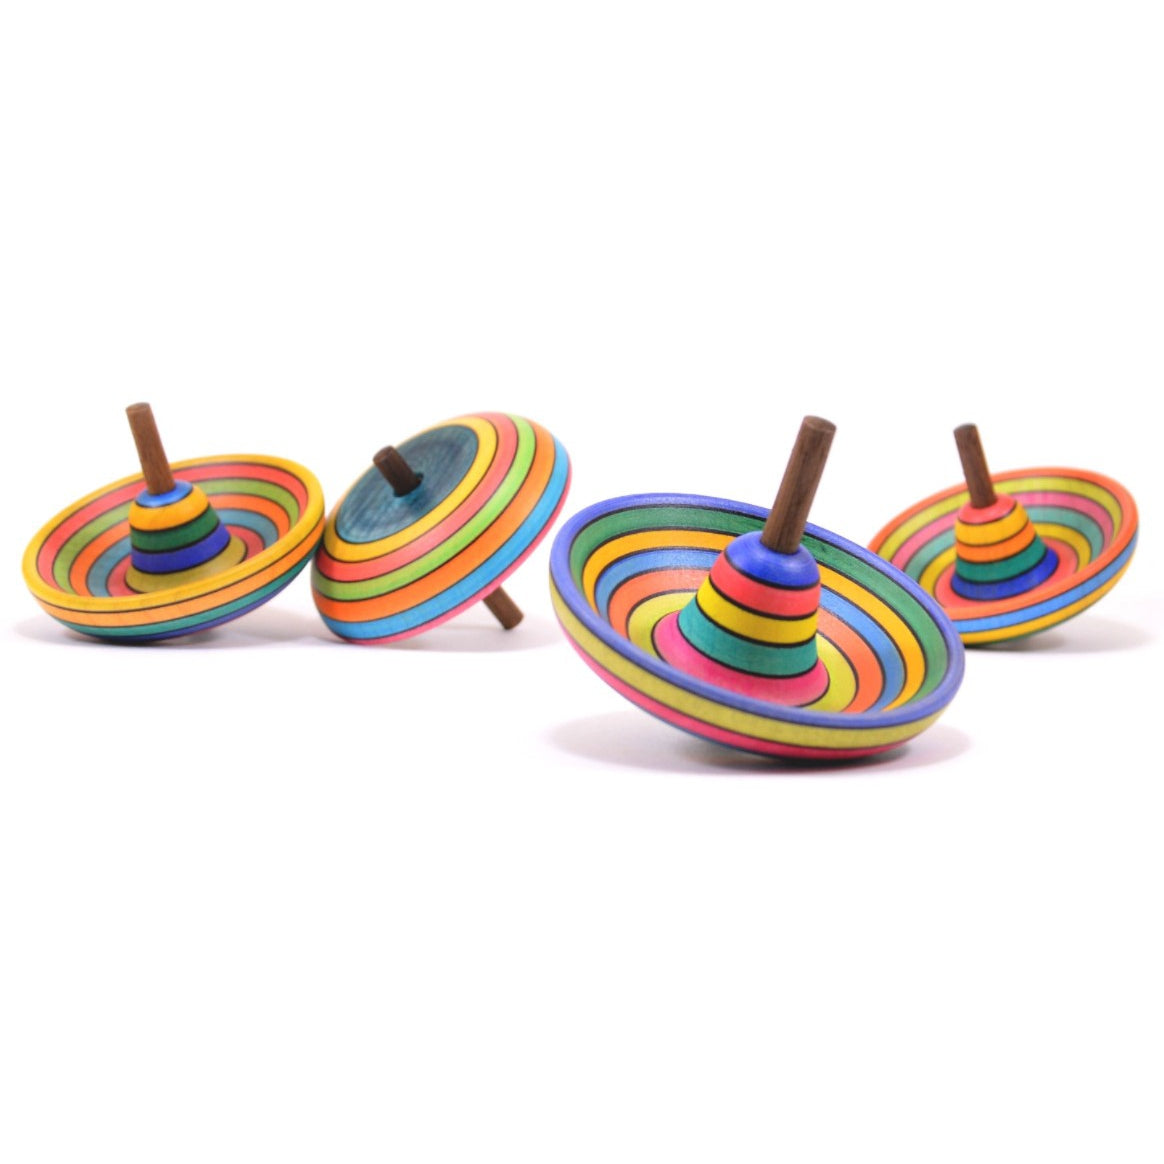 Striped Sombrero Spinning Top by Mader